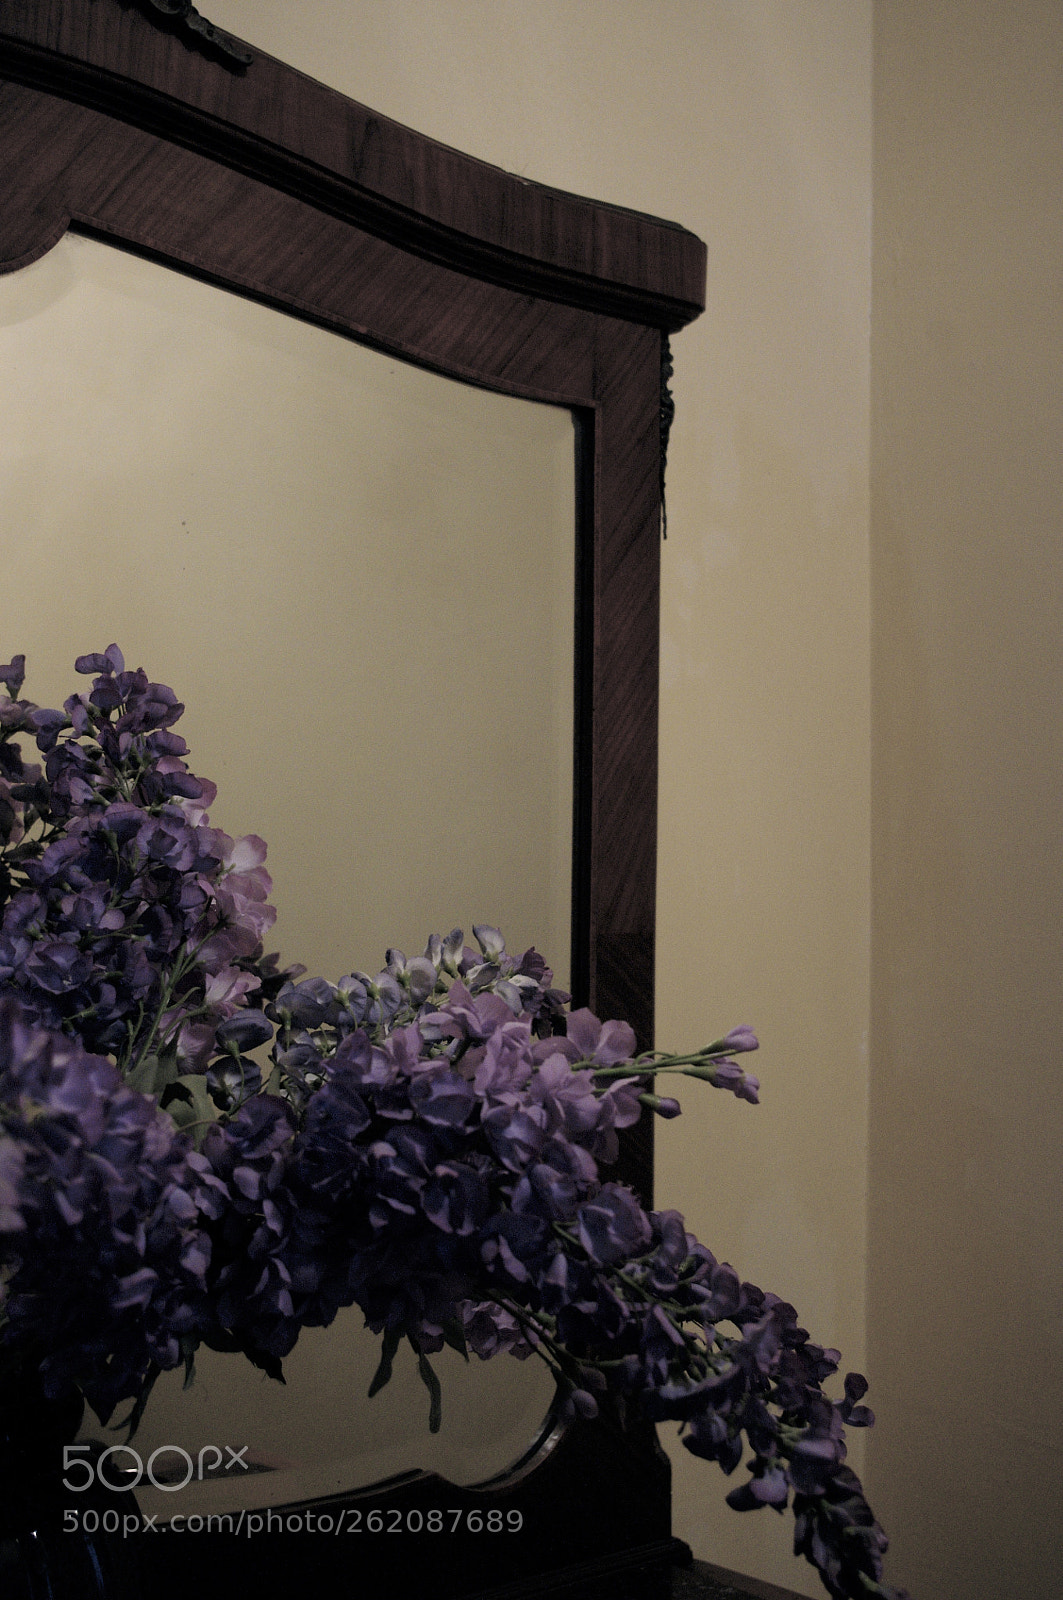 Pentax K-r sample photo. Violet flowers and mirror photography